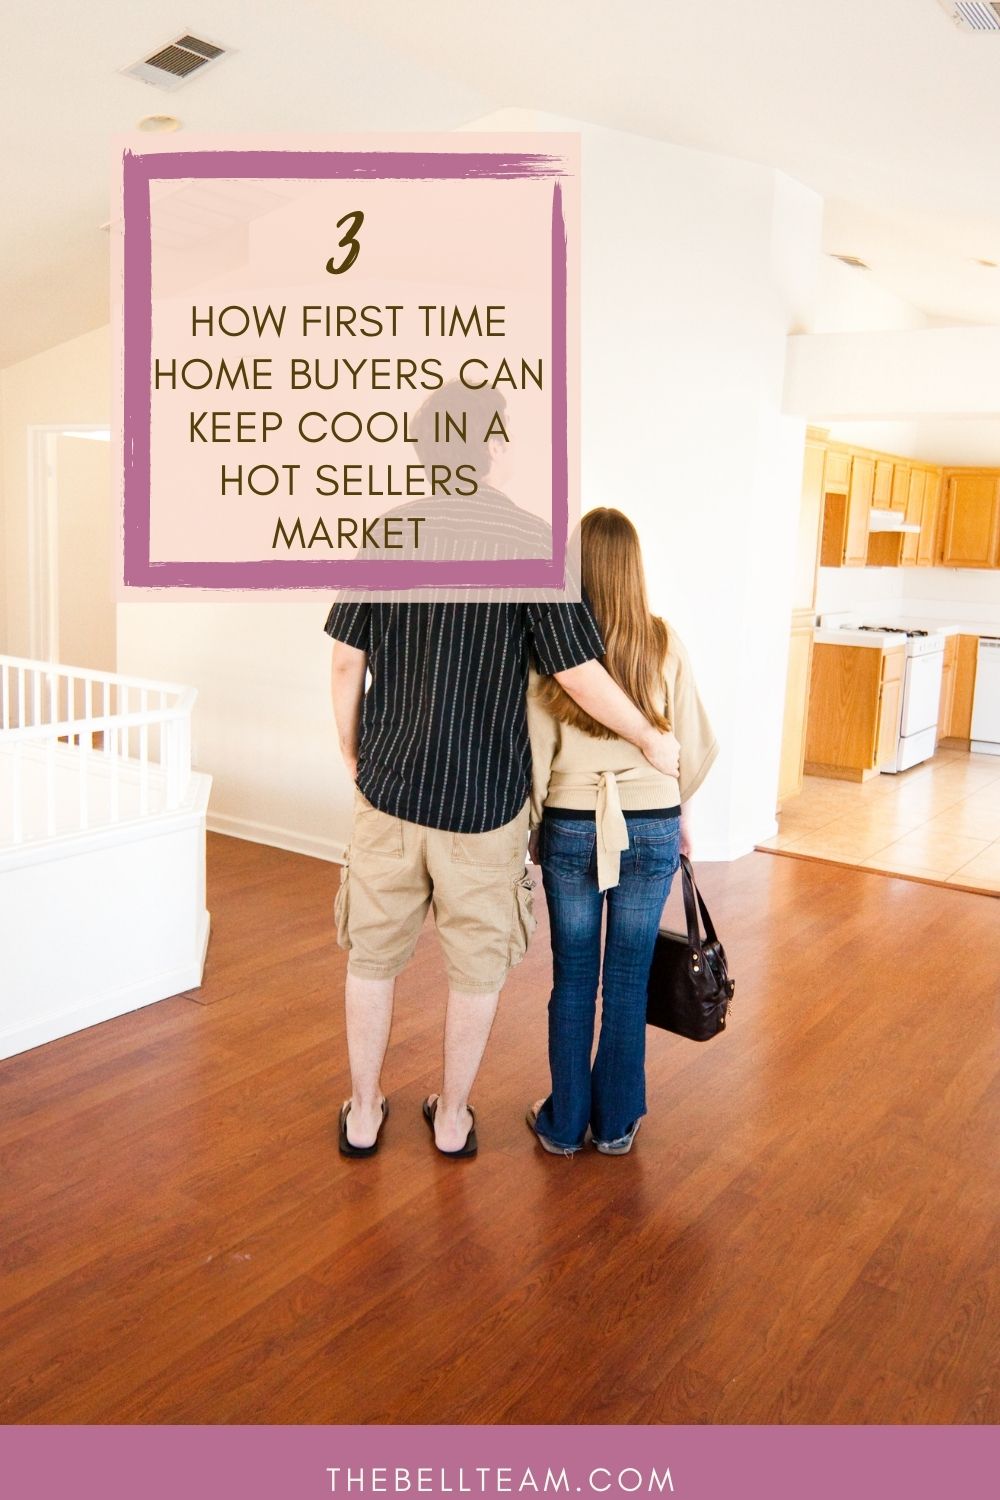 How First Time Home Buyers Can Keep Cool in a Hot Sellers Market